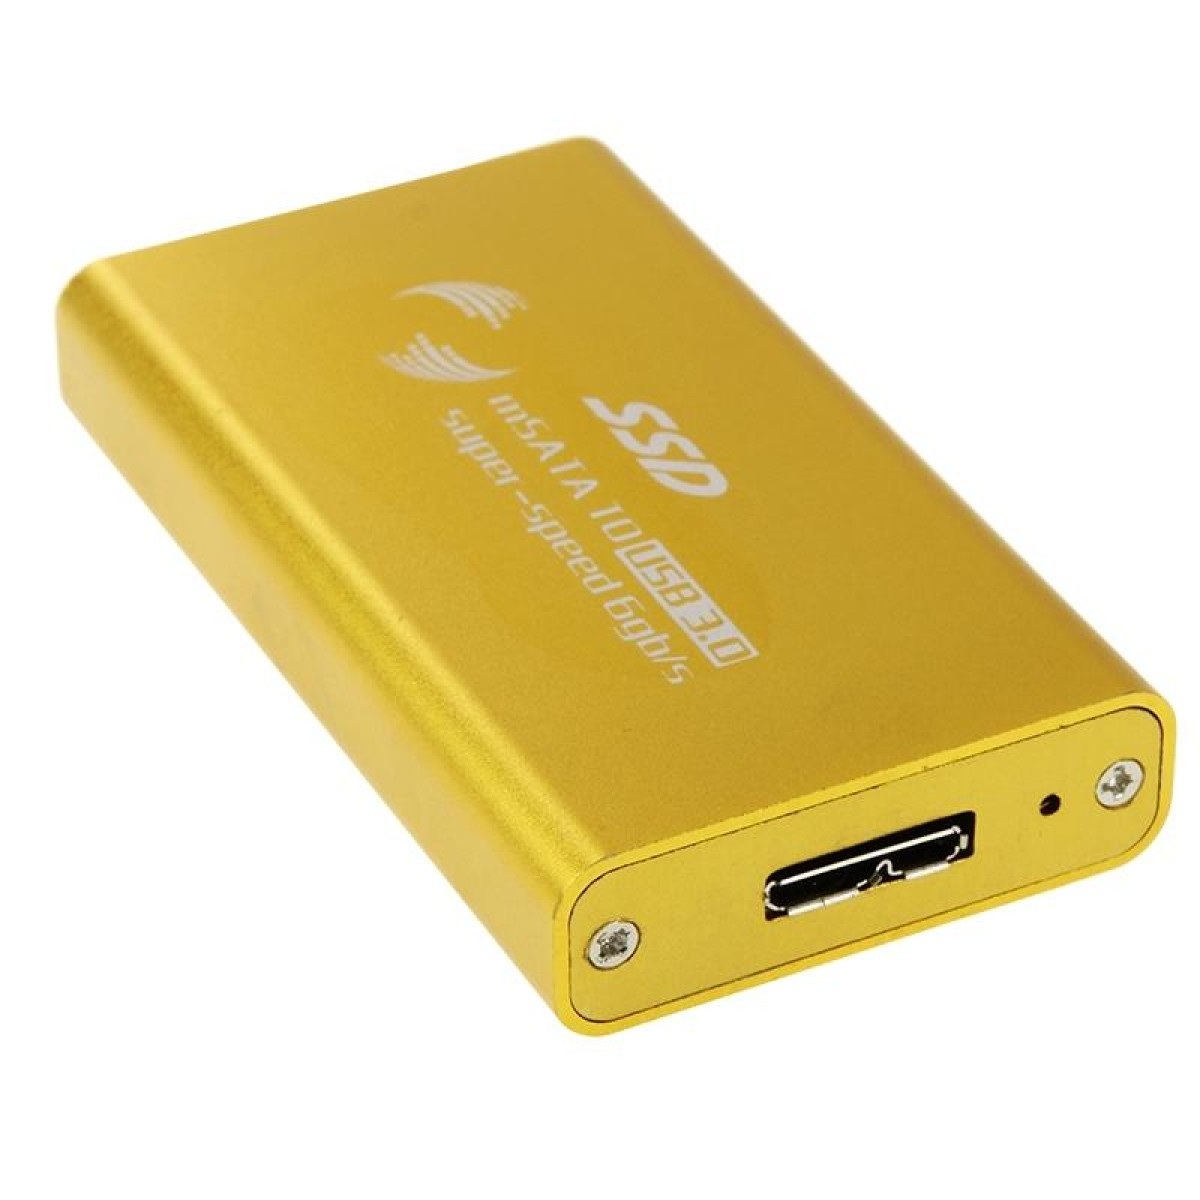 6gb/s mSATA Solid State Disk SSD to USB 3.0 Hard Disk Case(Gold)